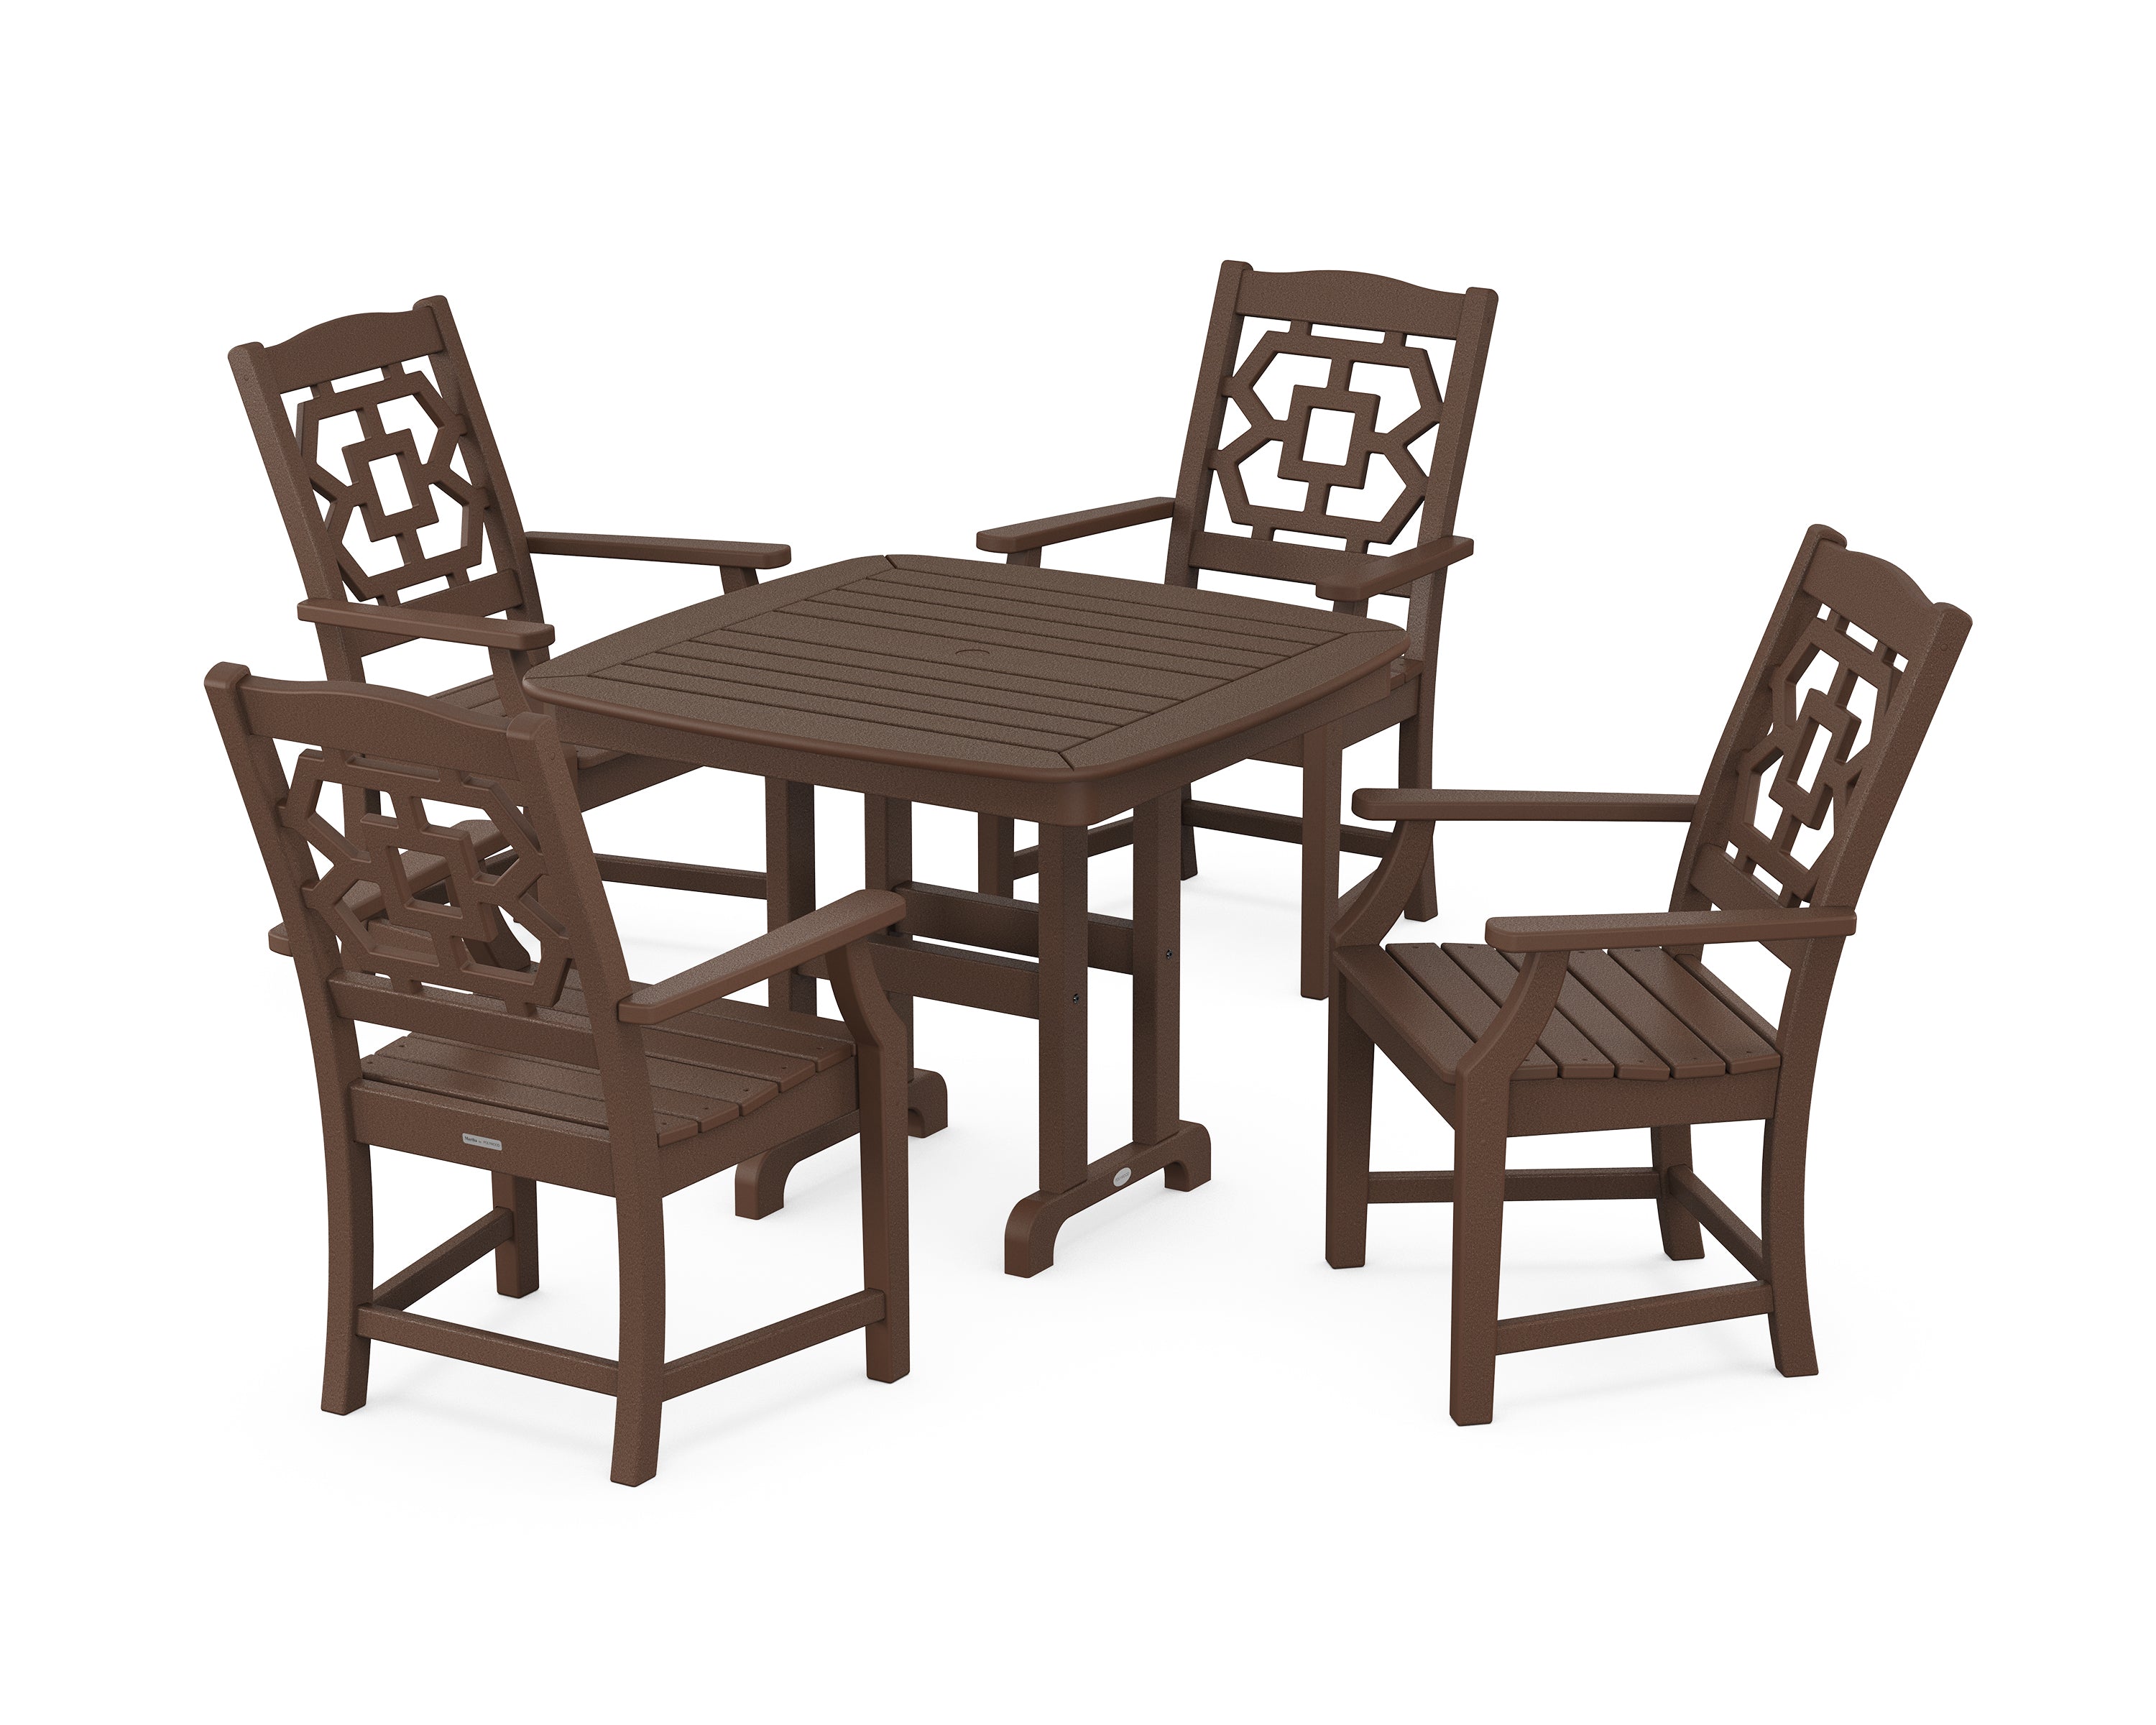 Martha Stewart by POLYWOOD® Chinoiserie 5-Piece Dining Set in Mahogany